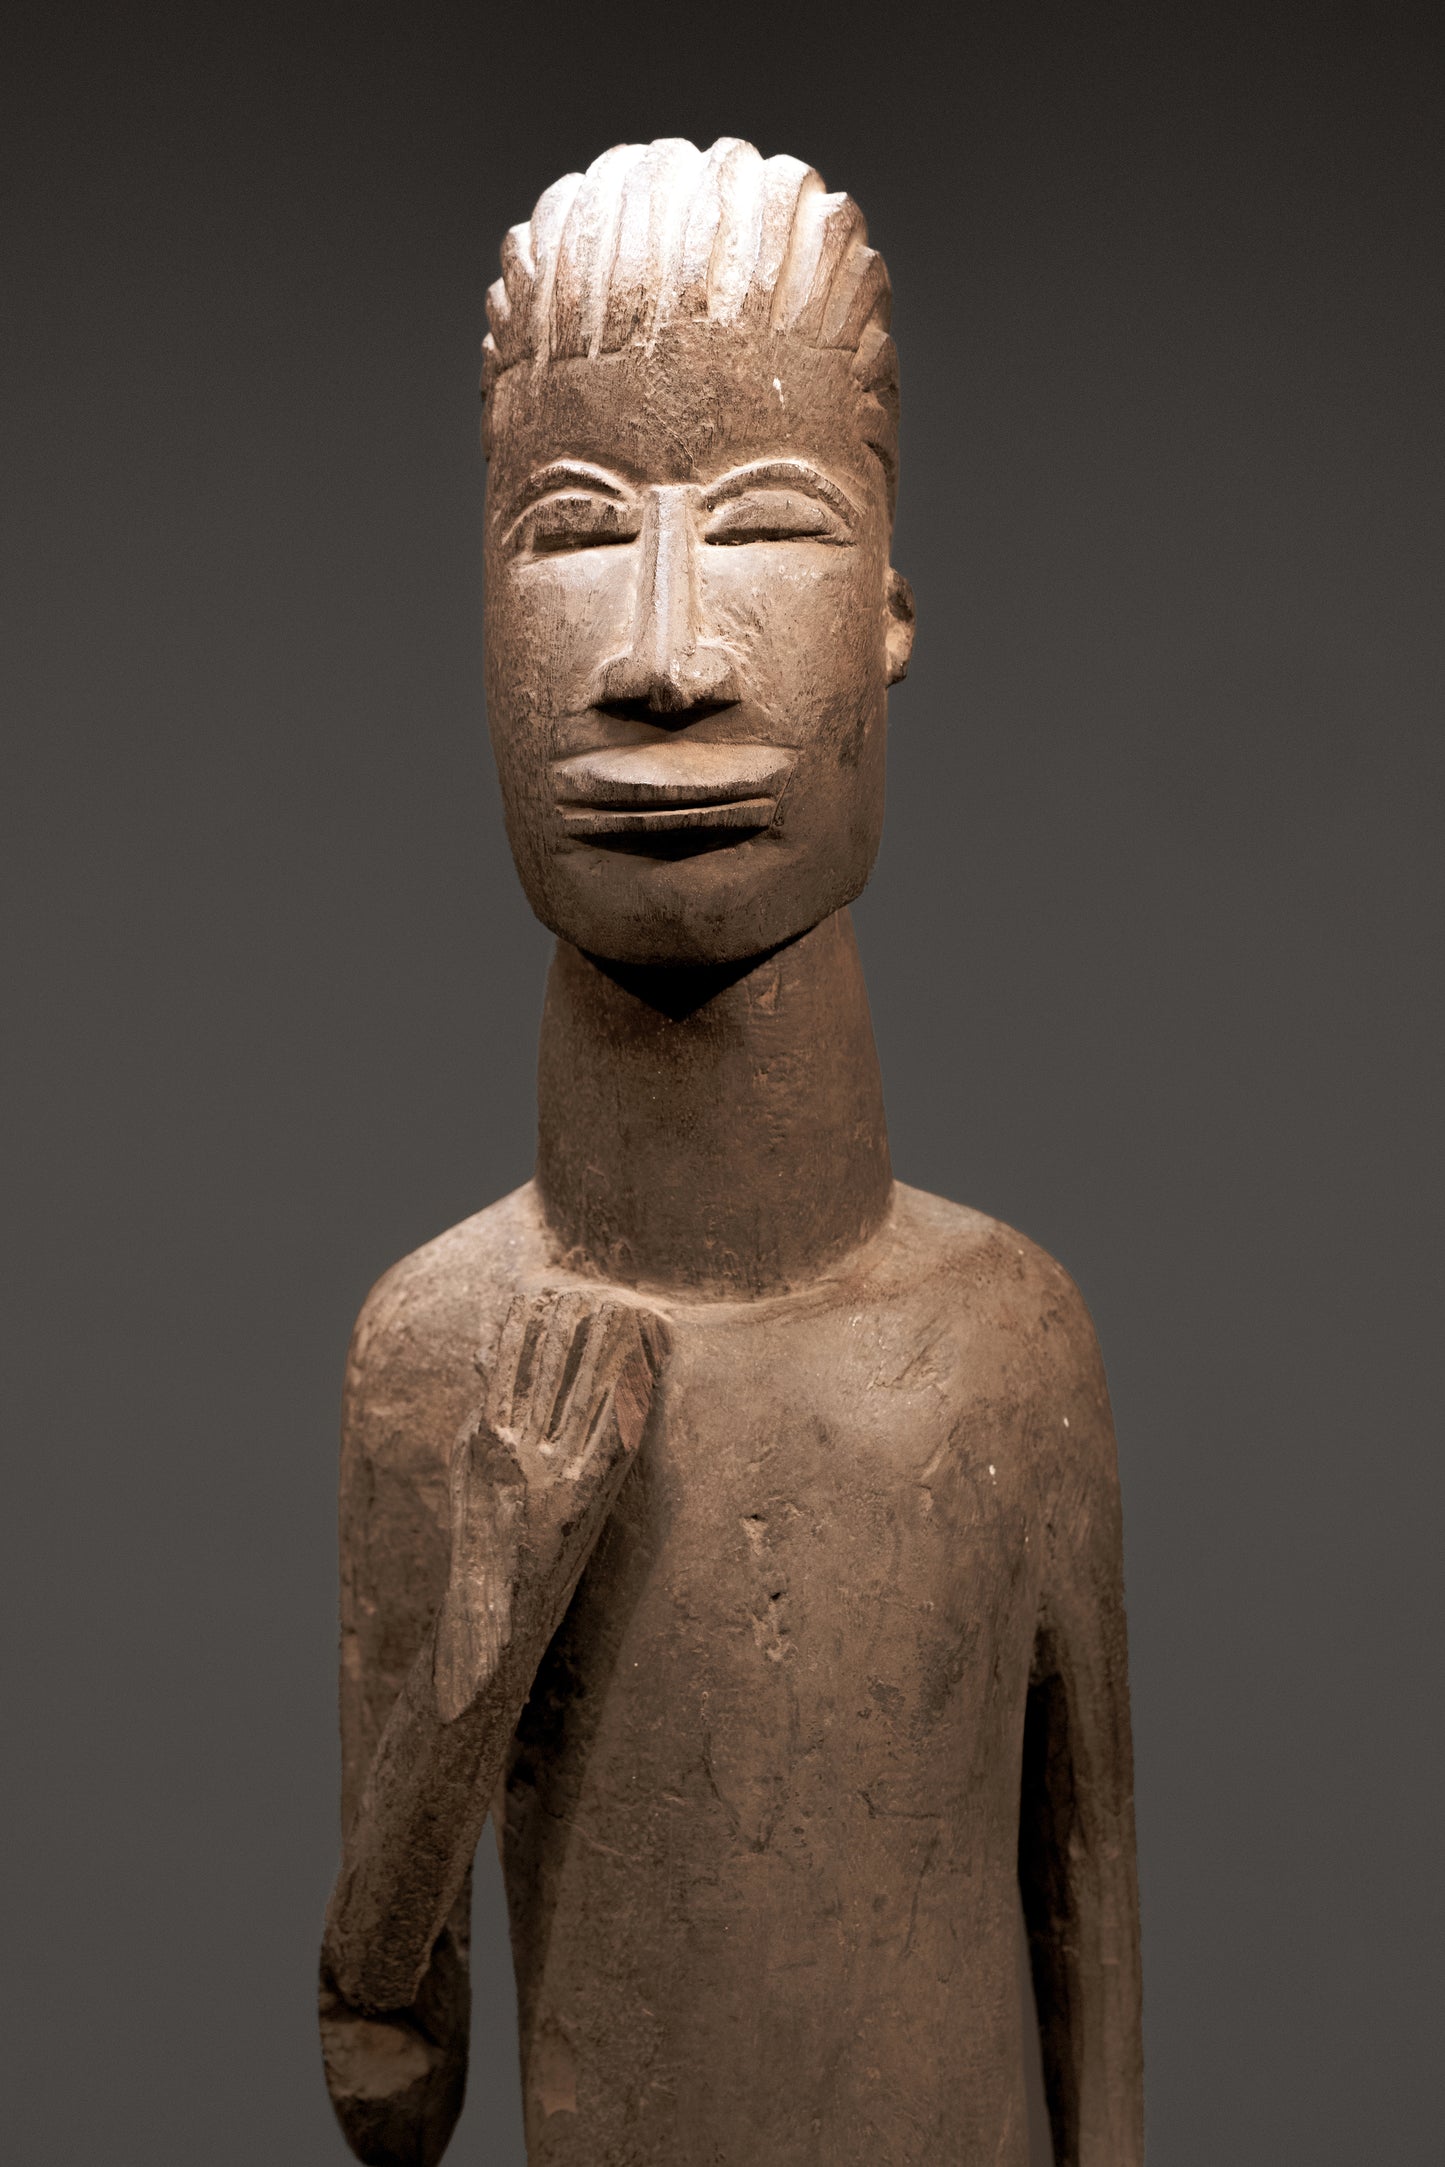 An early sculpture of Dihunthe Palenfo